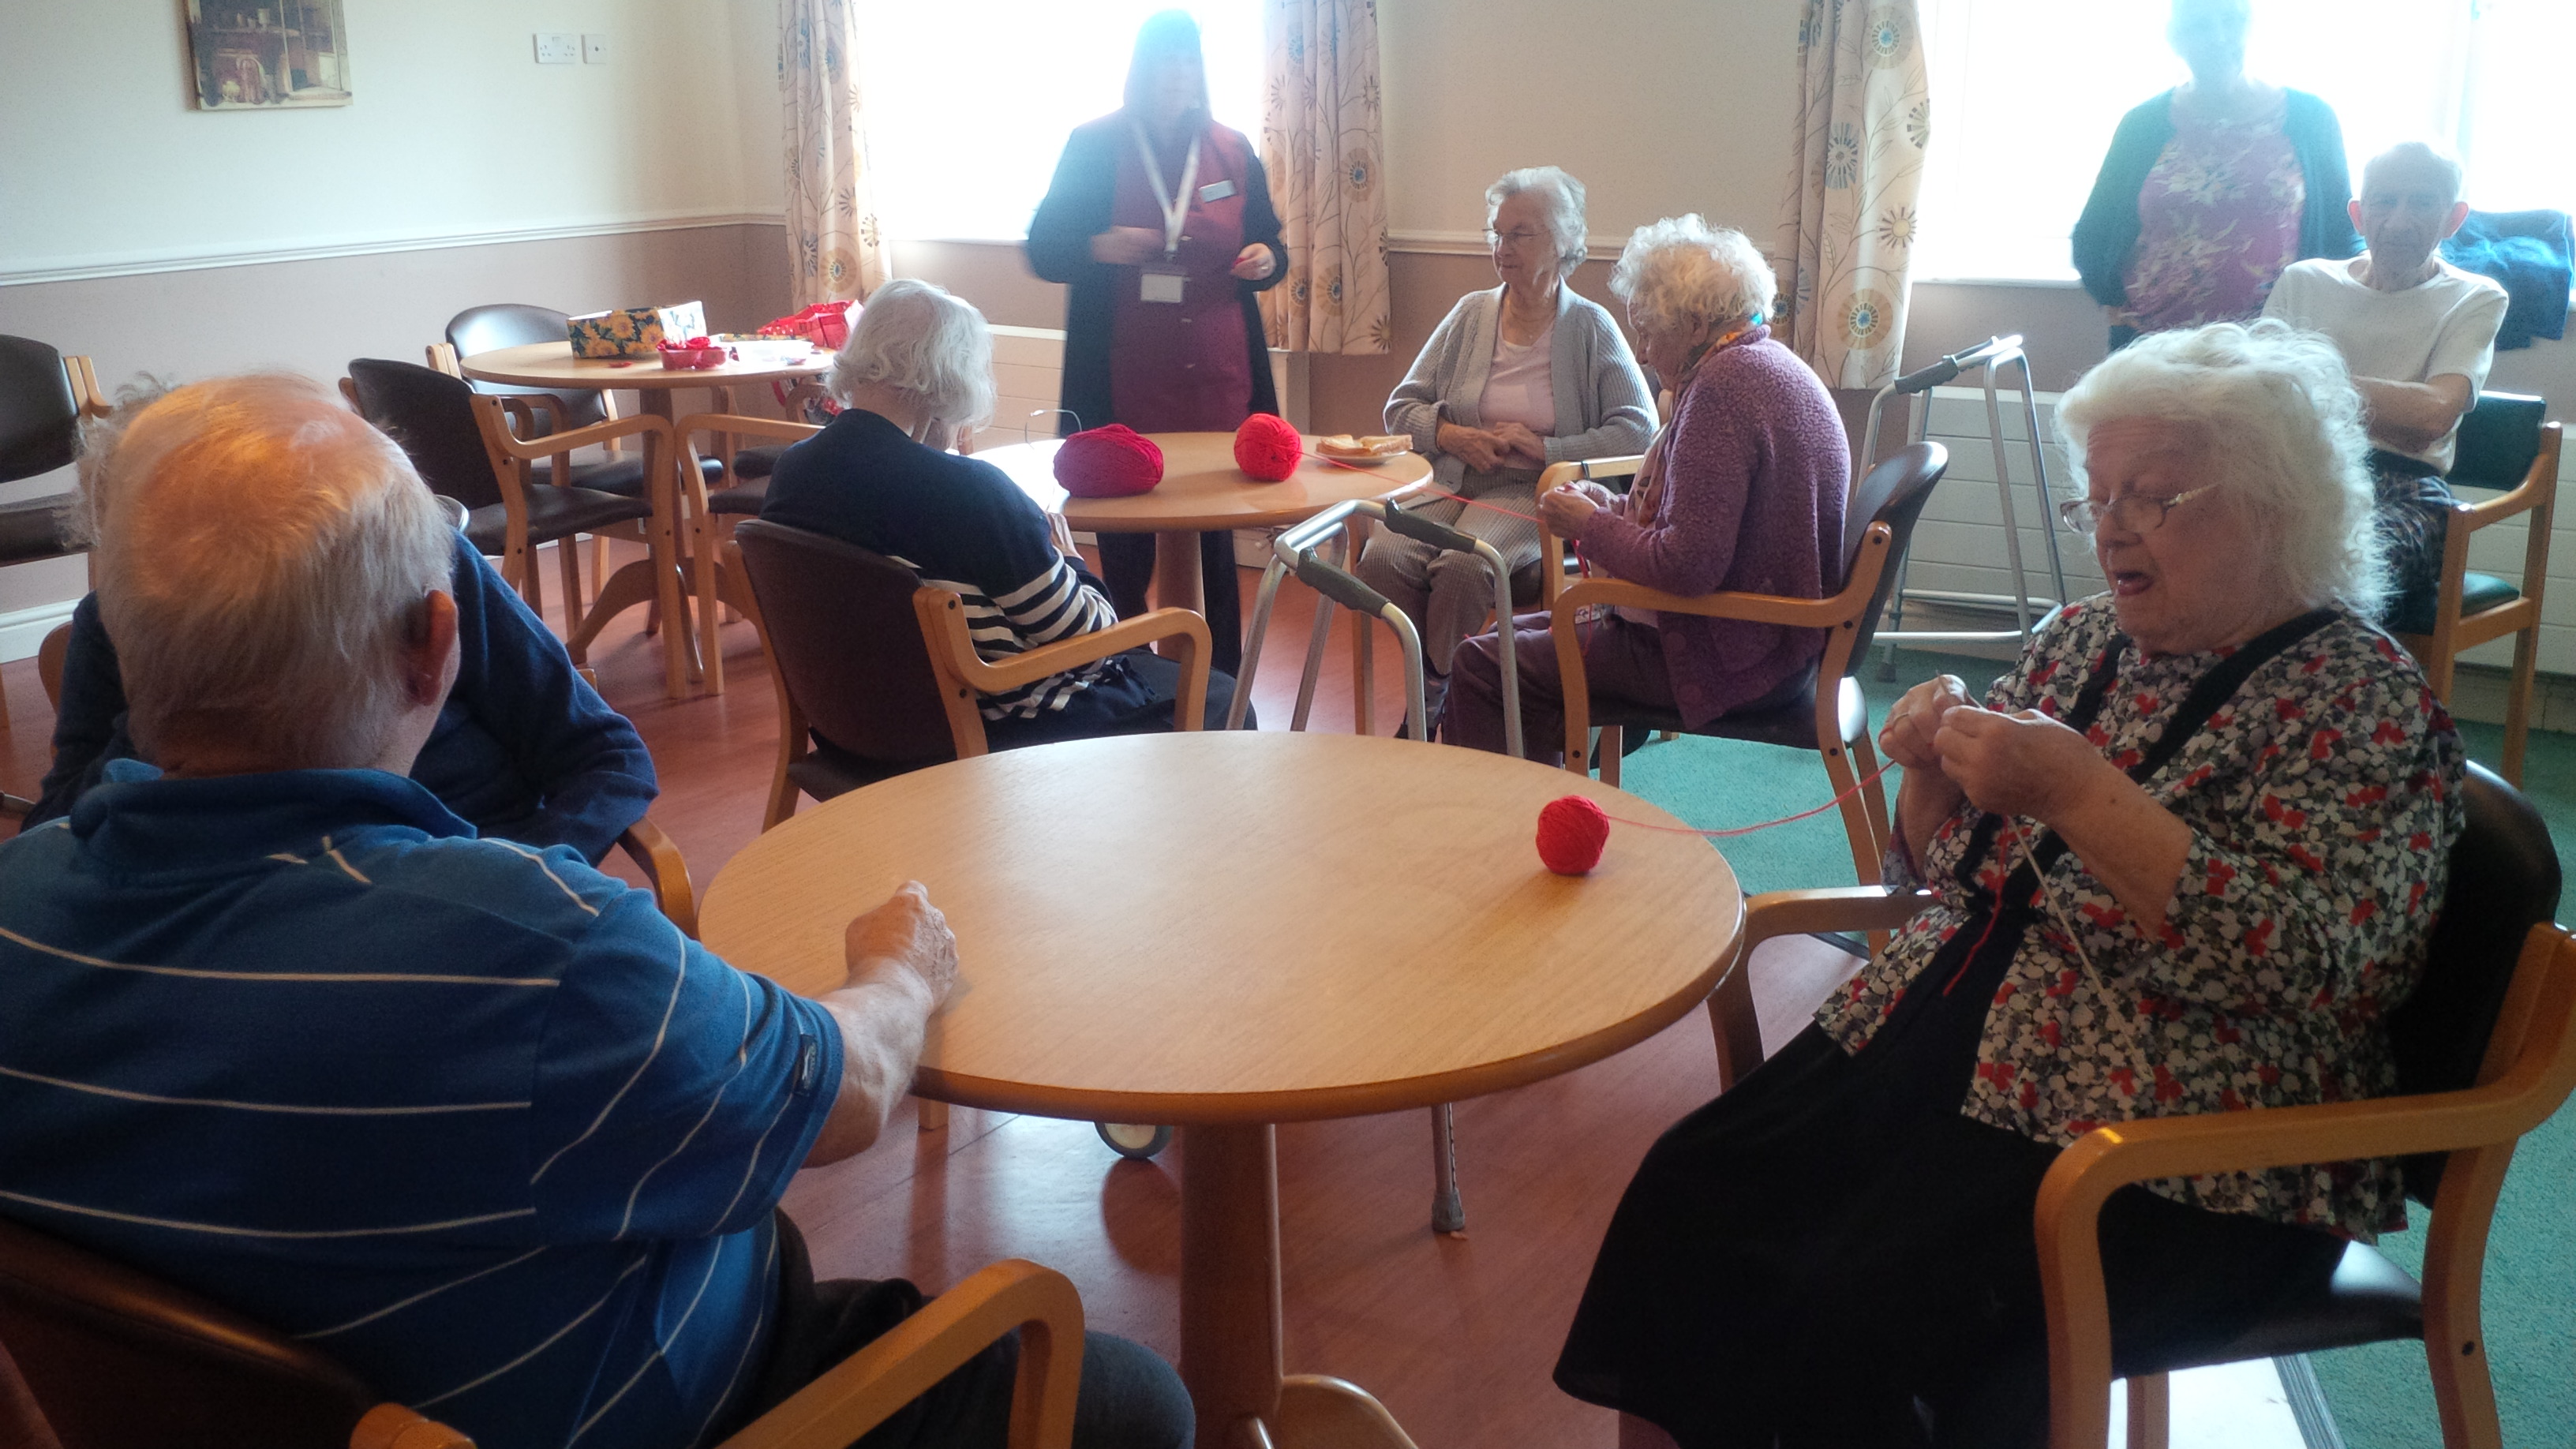 Four Seasons Care Centre Knitting, Crochet & Sewing Group : Key Healthcare is dedicated to caring for elderly residents in safe. We have multiple dementia care homes including our care home middlesbrough, our care home St. Helen and care home saltburn. We excel in monitoring and improving care levels.